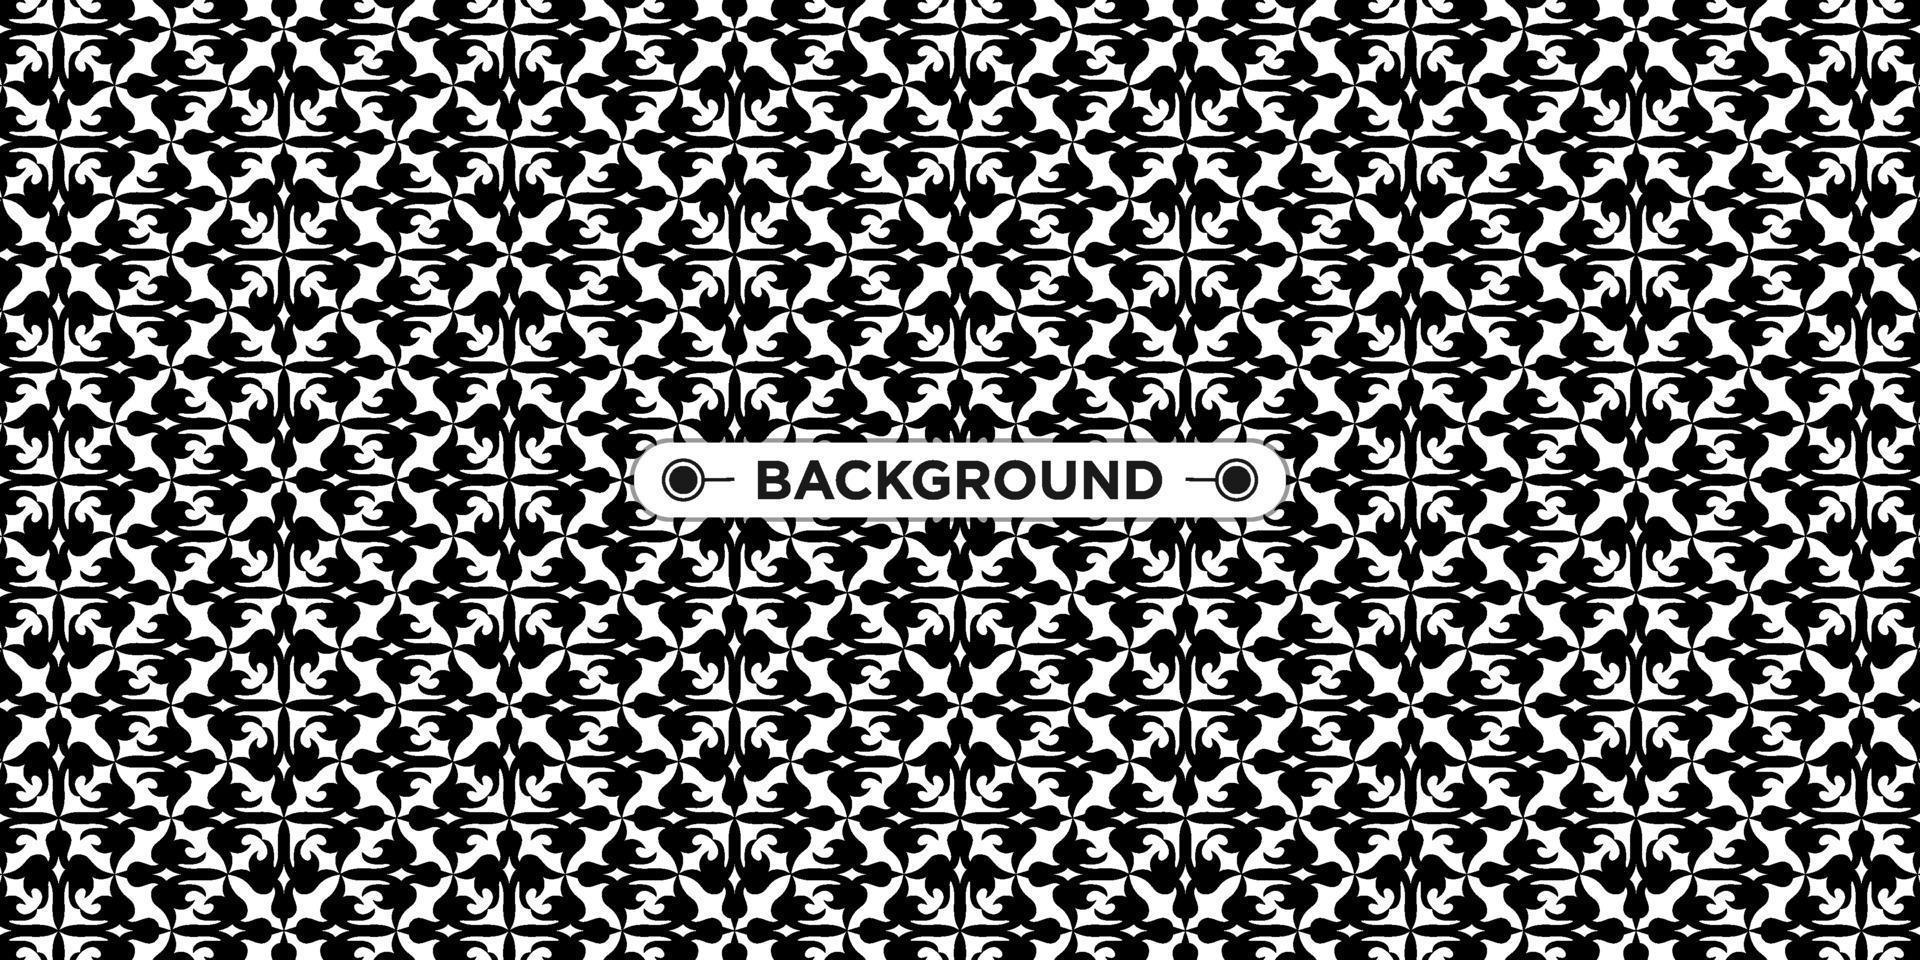 black and white background with ethnic texture vector